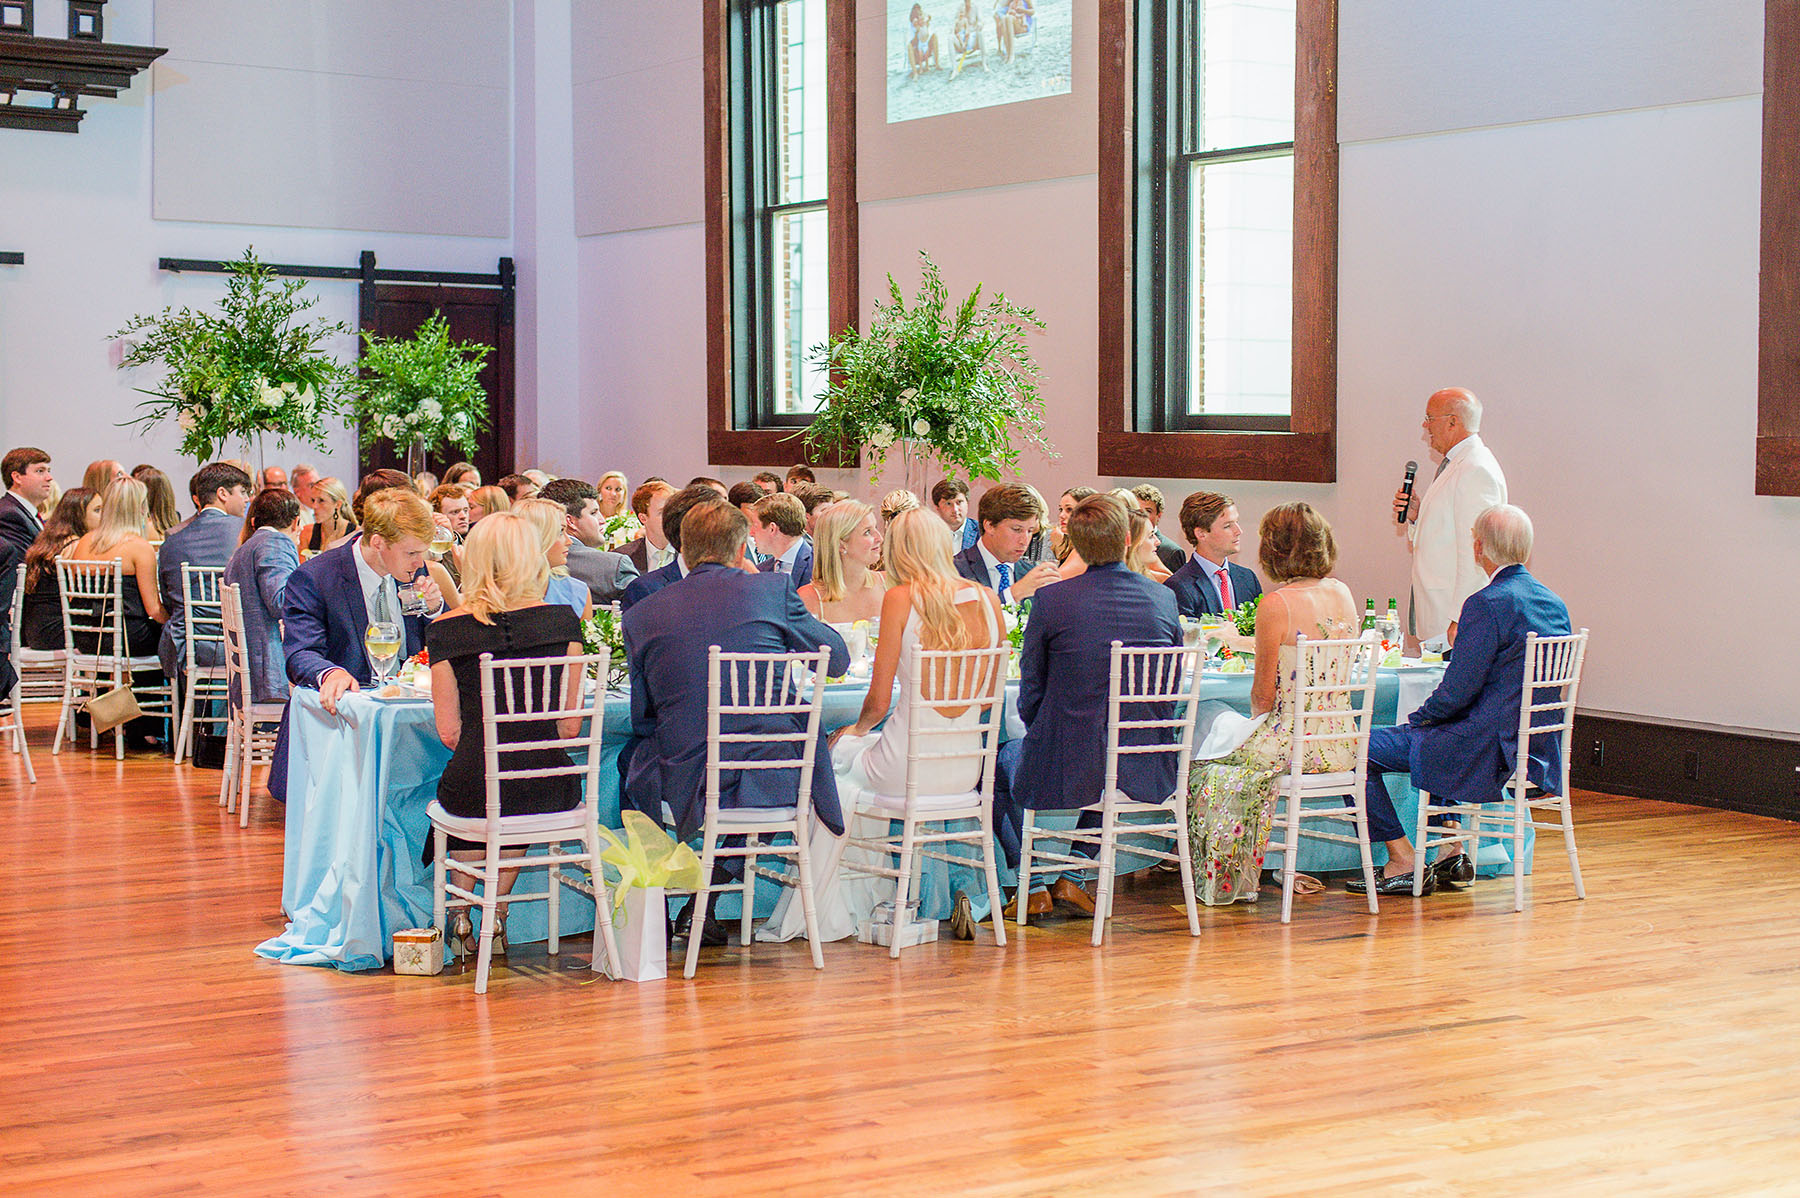 Guests Seated at Rehearsal Dinner